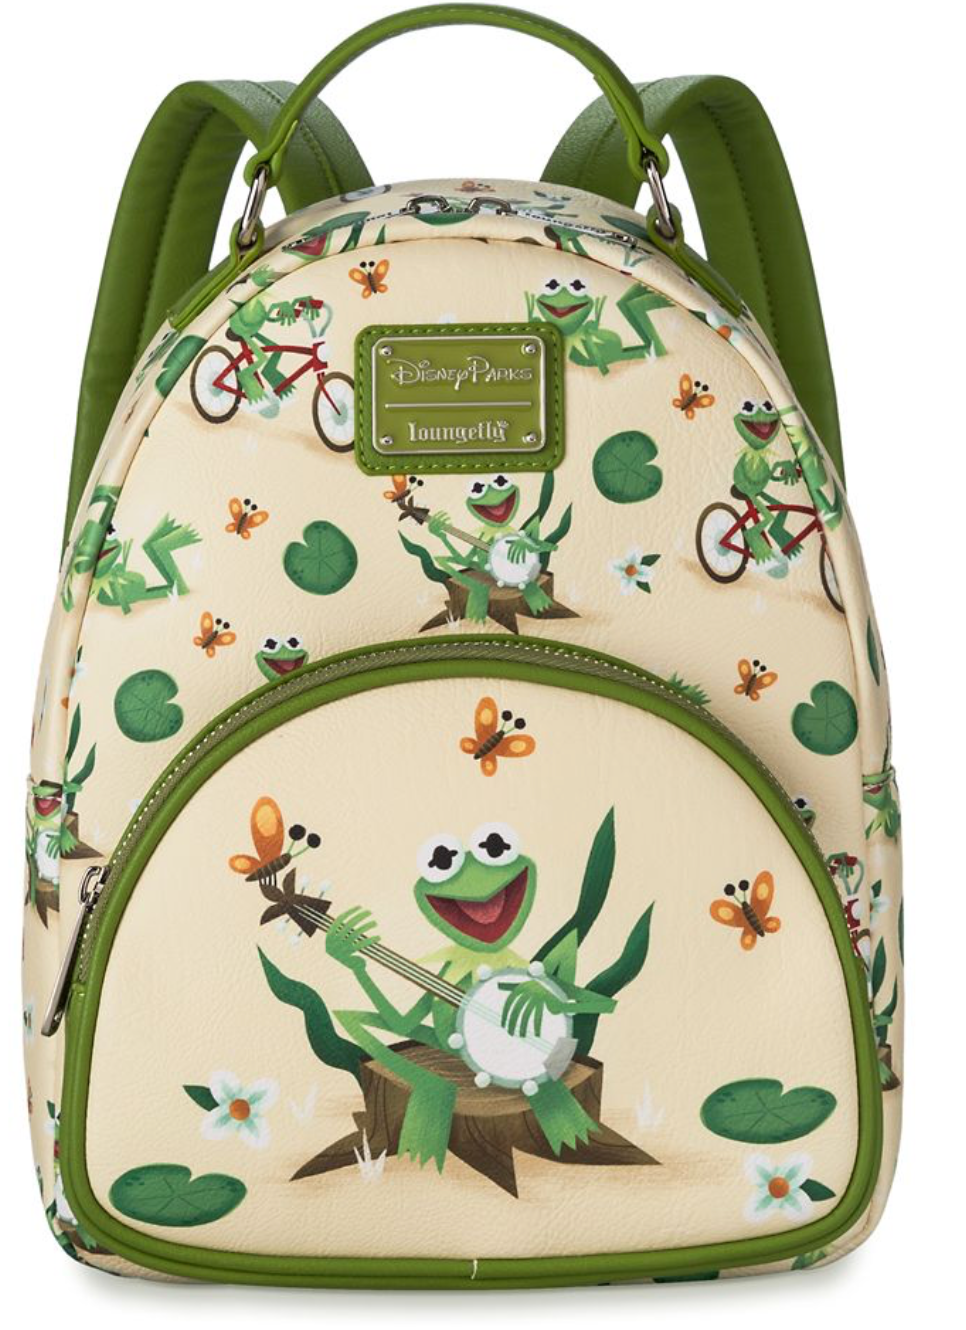 Disney Parks Kermit Loungefly Mini Backpack – The Muppets New With Tag